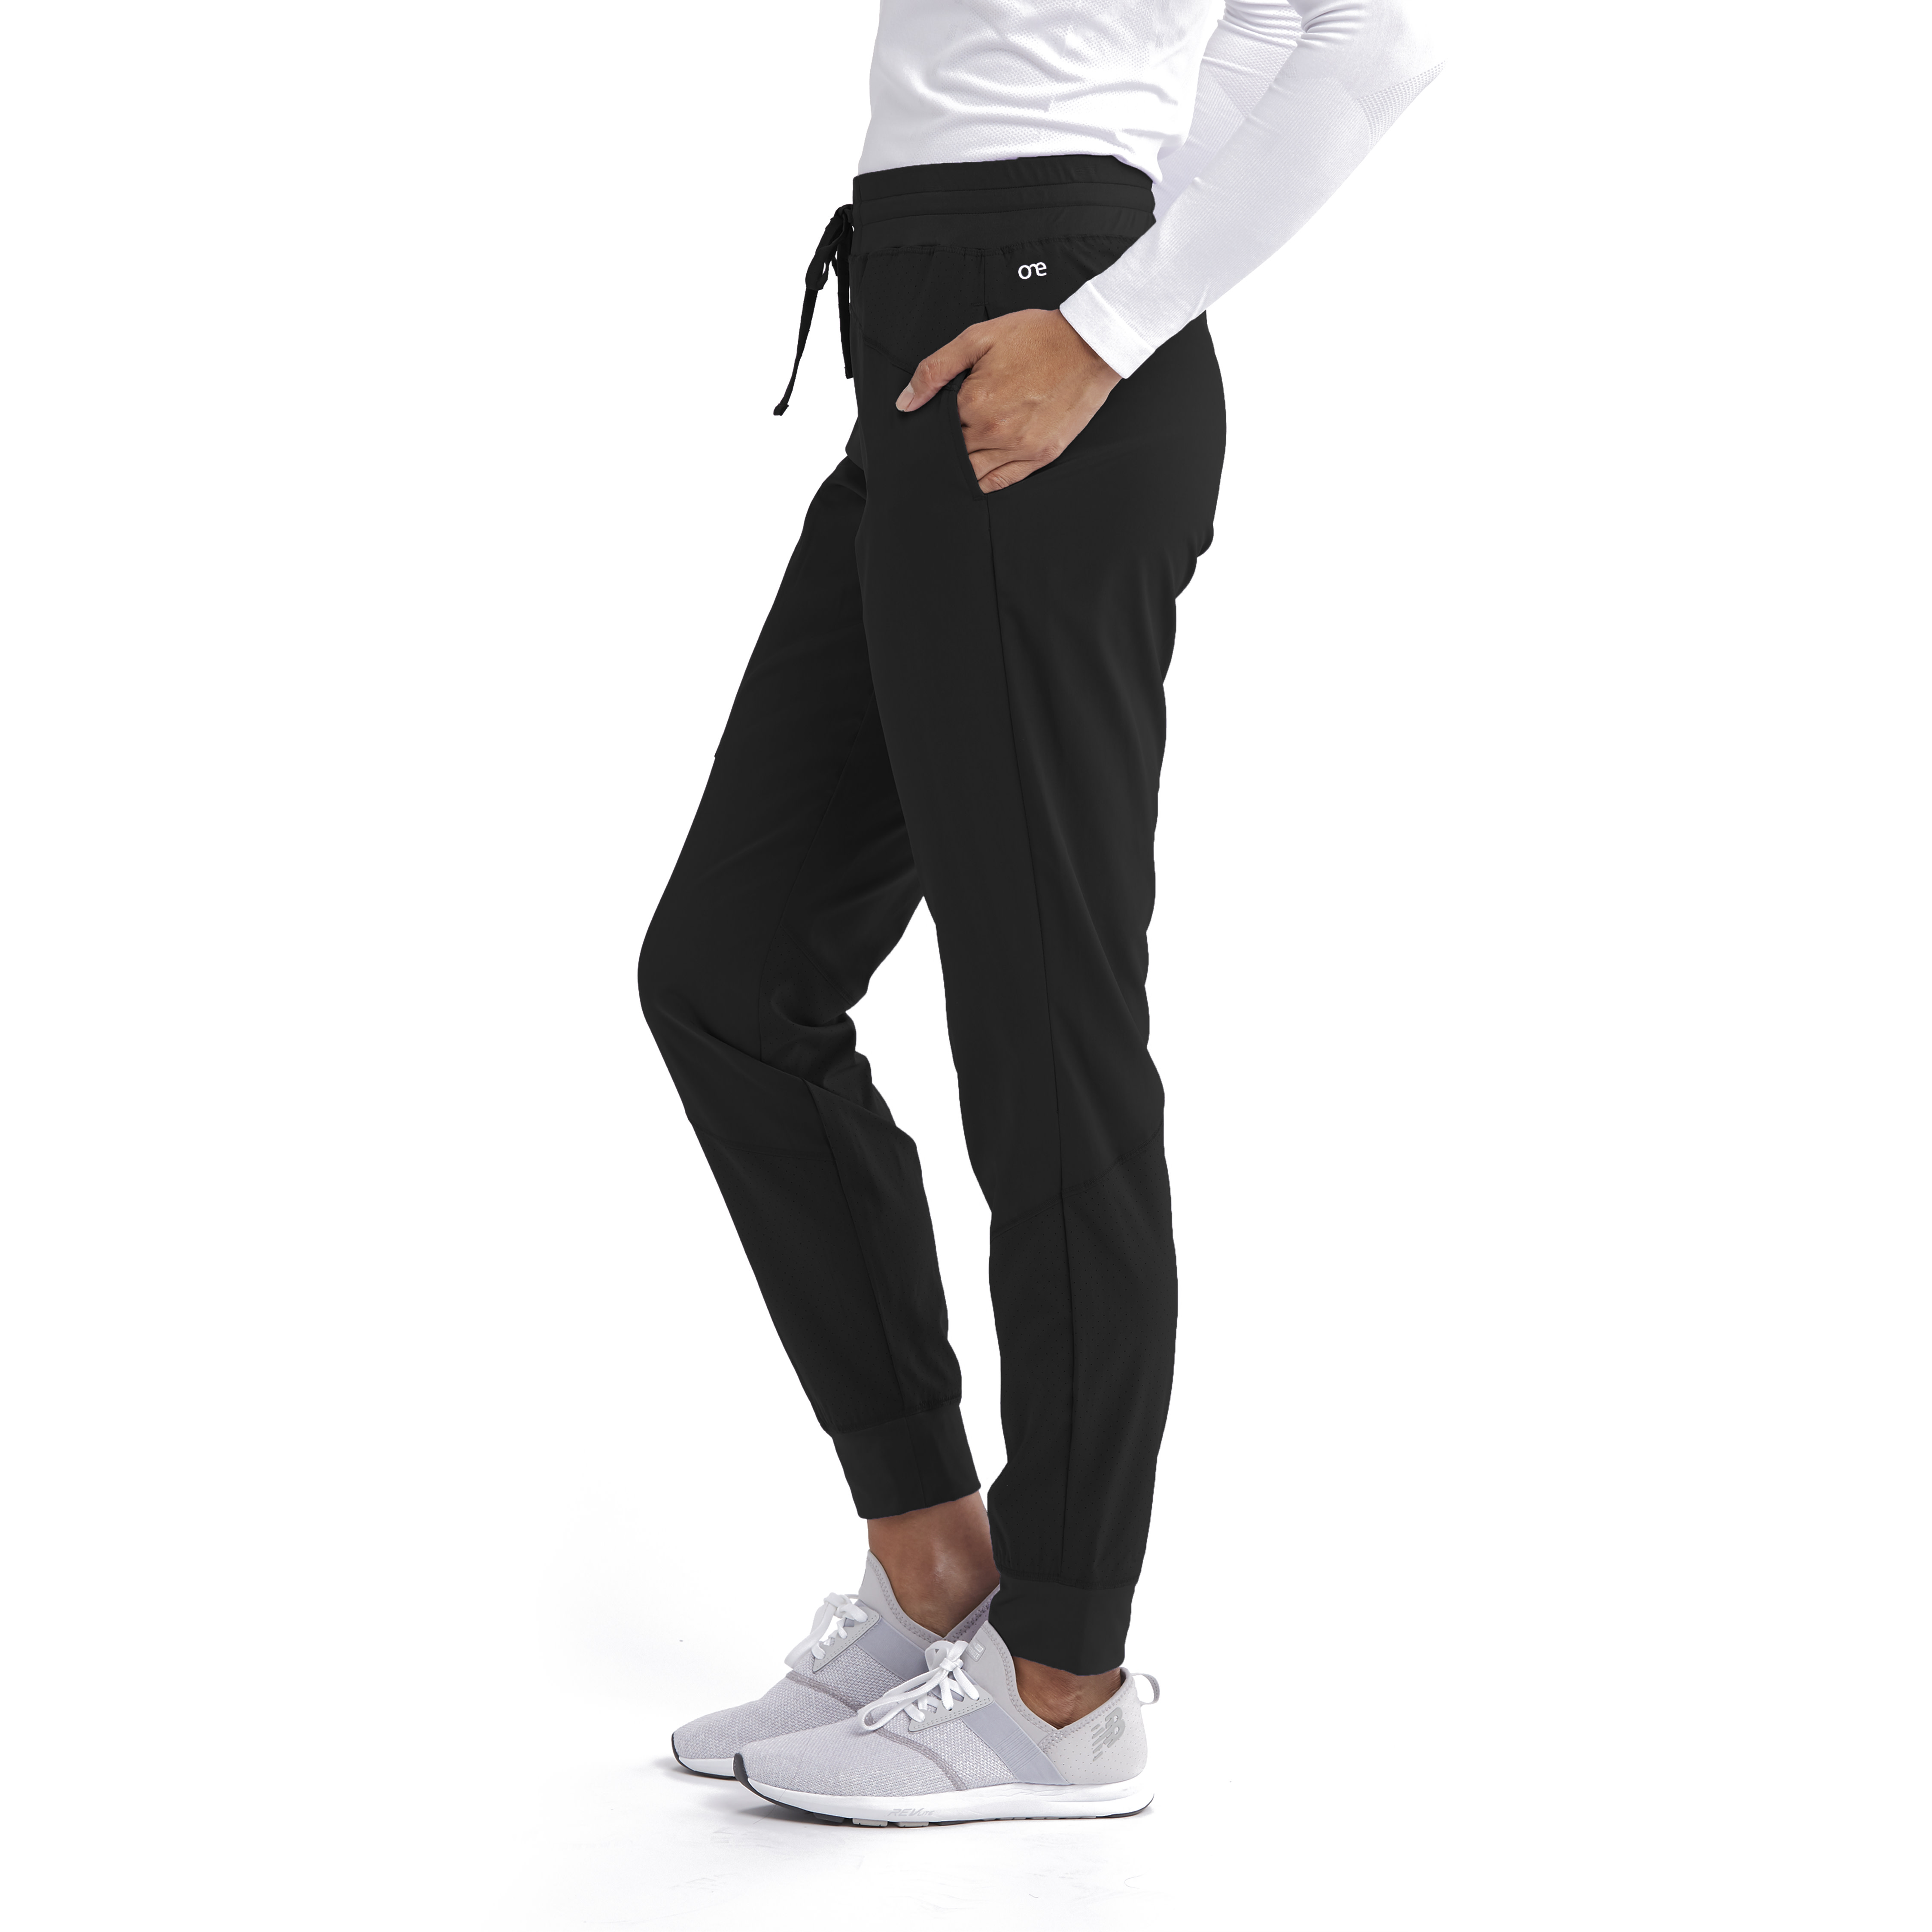 Boost Jogger by Barco One/ lightweight jogger